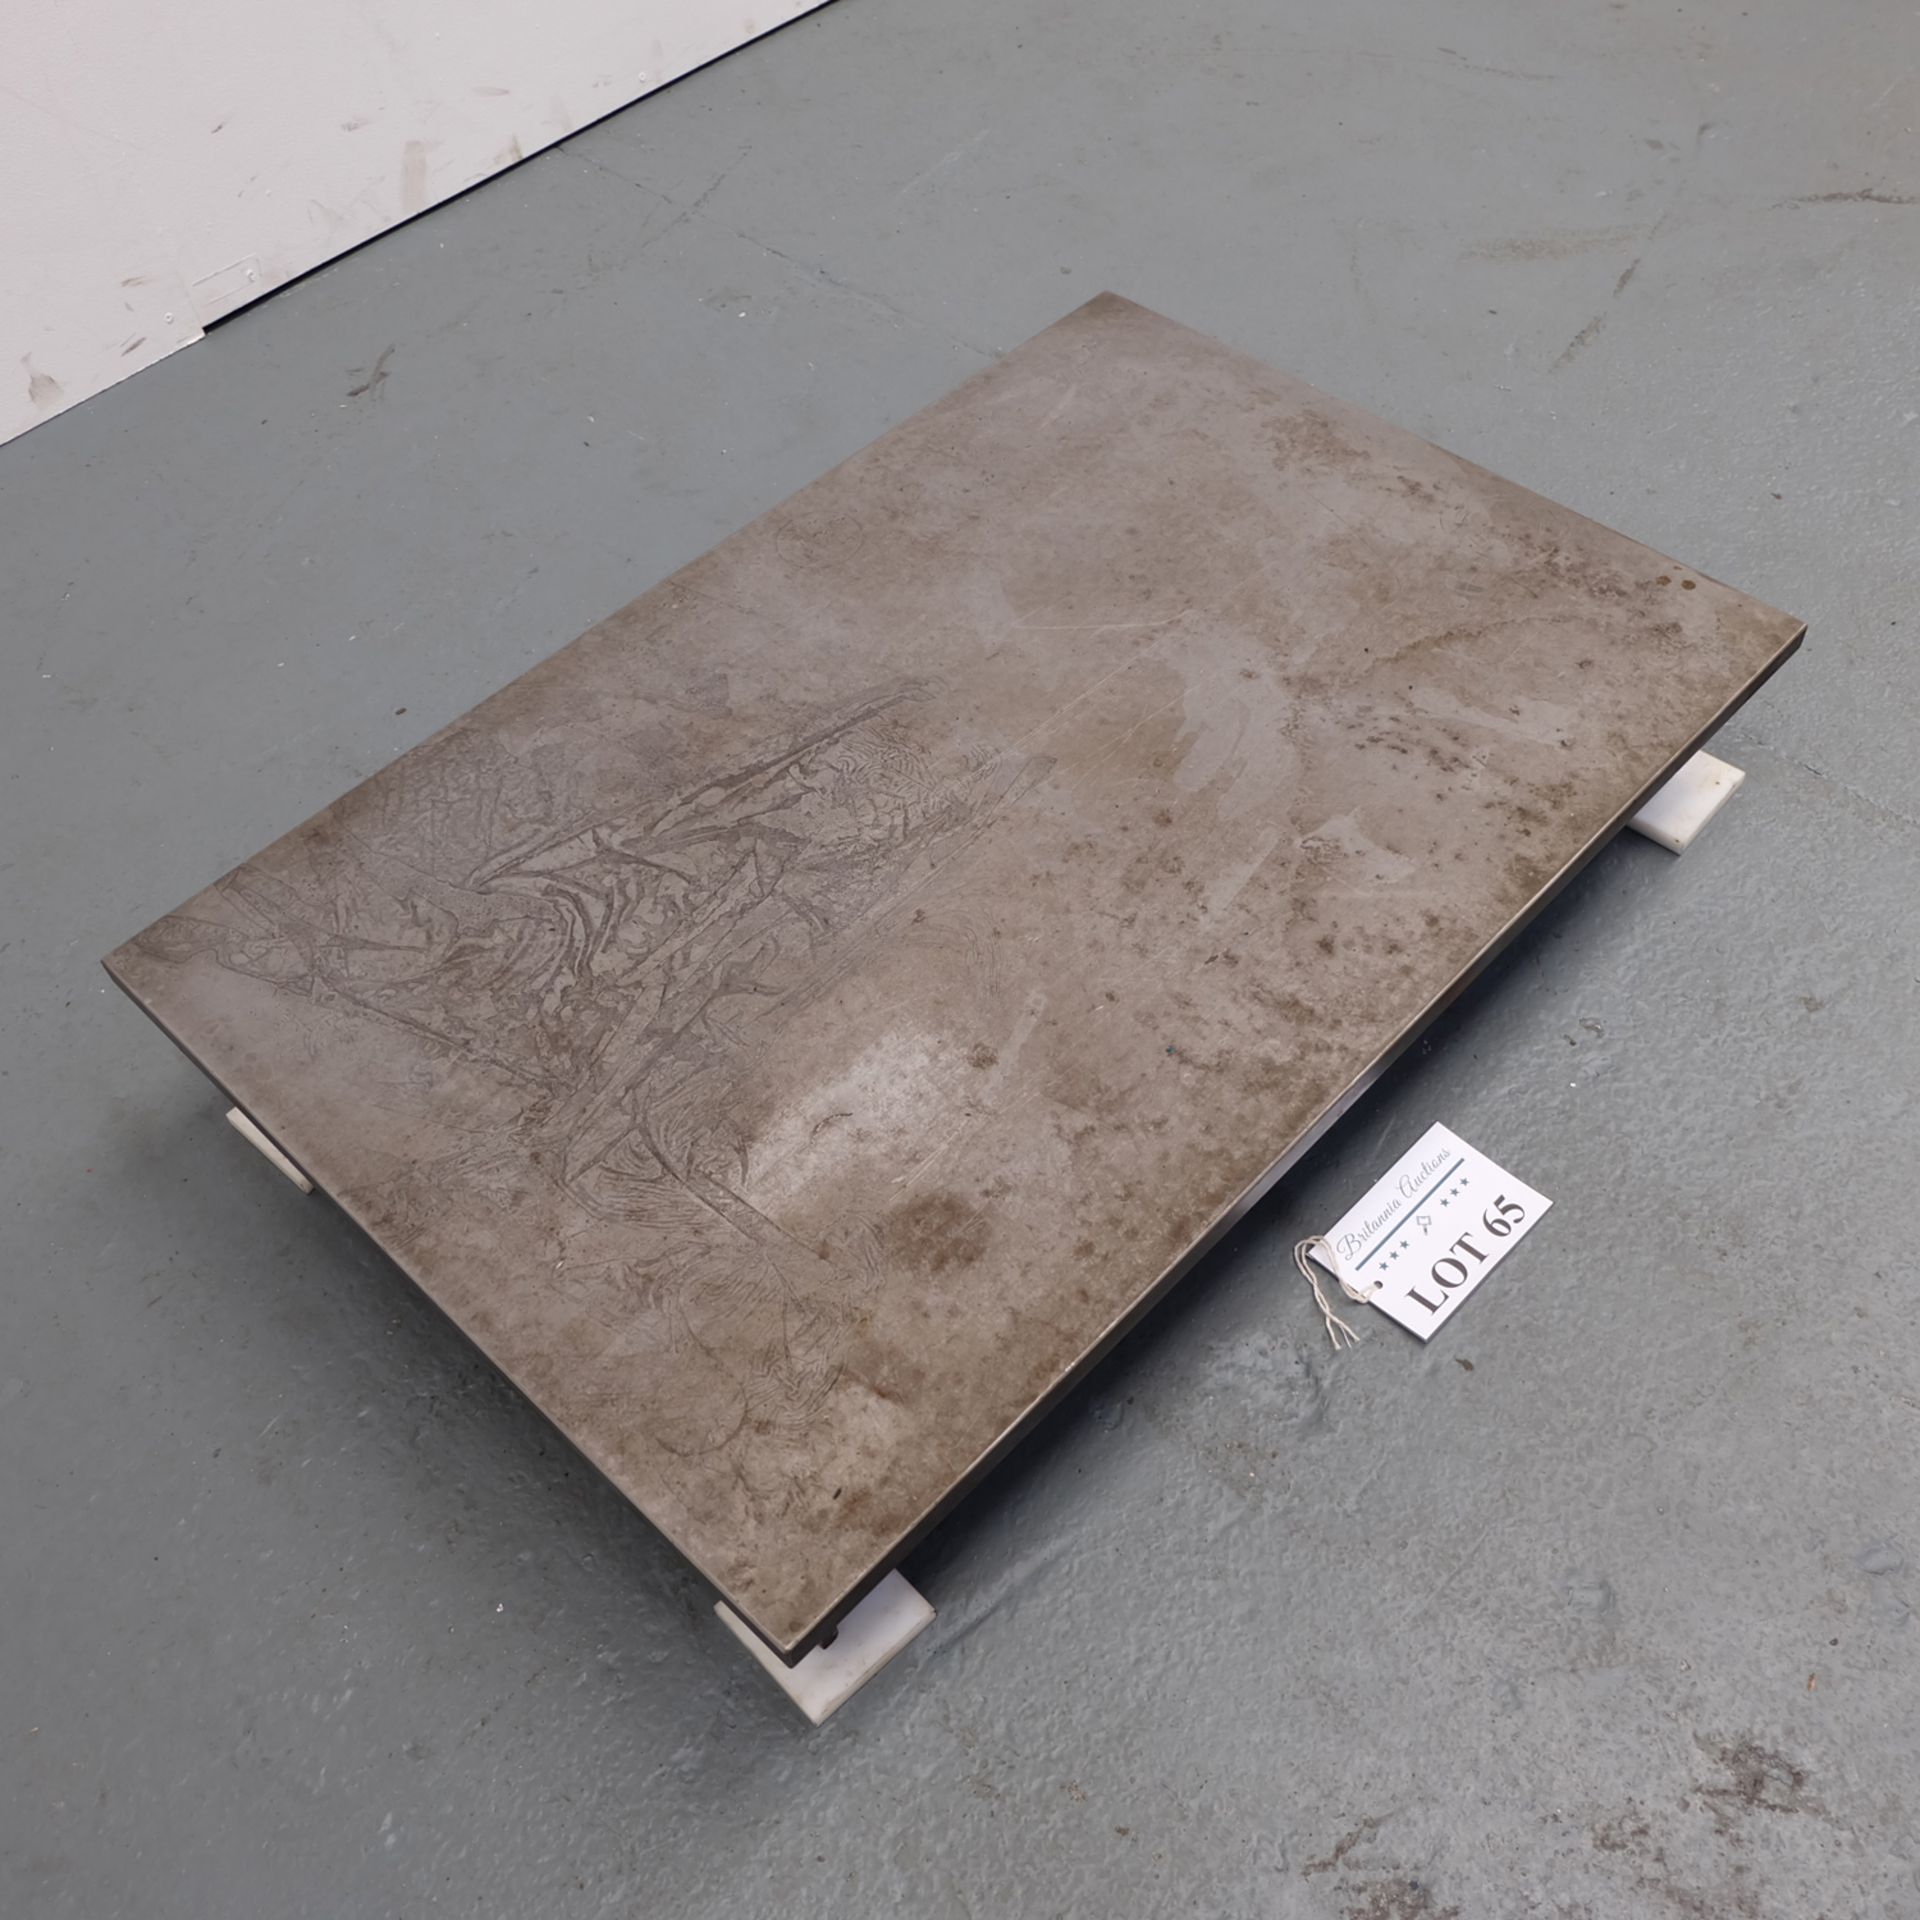 Large Cast Iron Surface Plate. 36" x 24" Approx. - Image 3 of 7